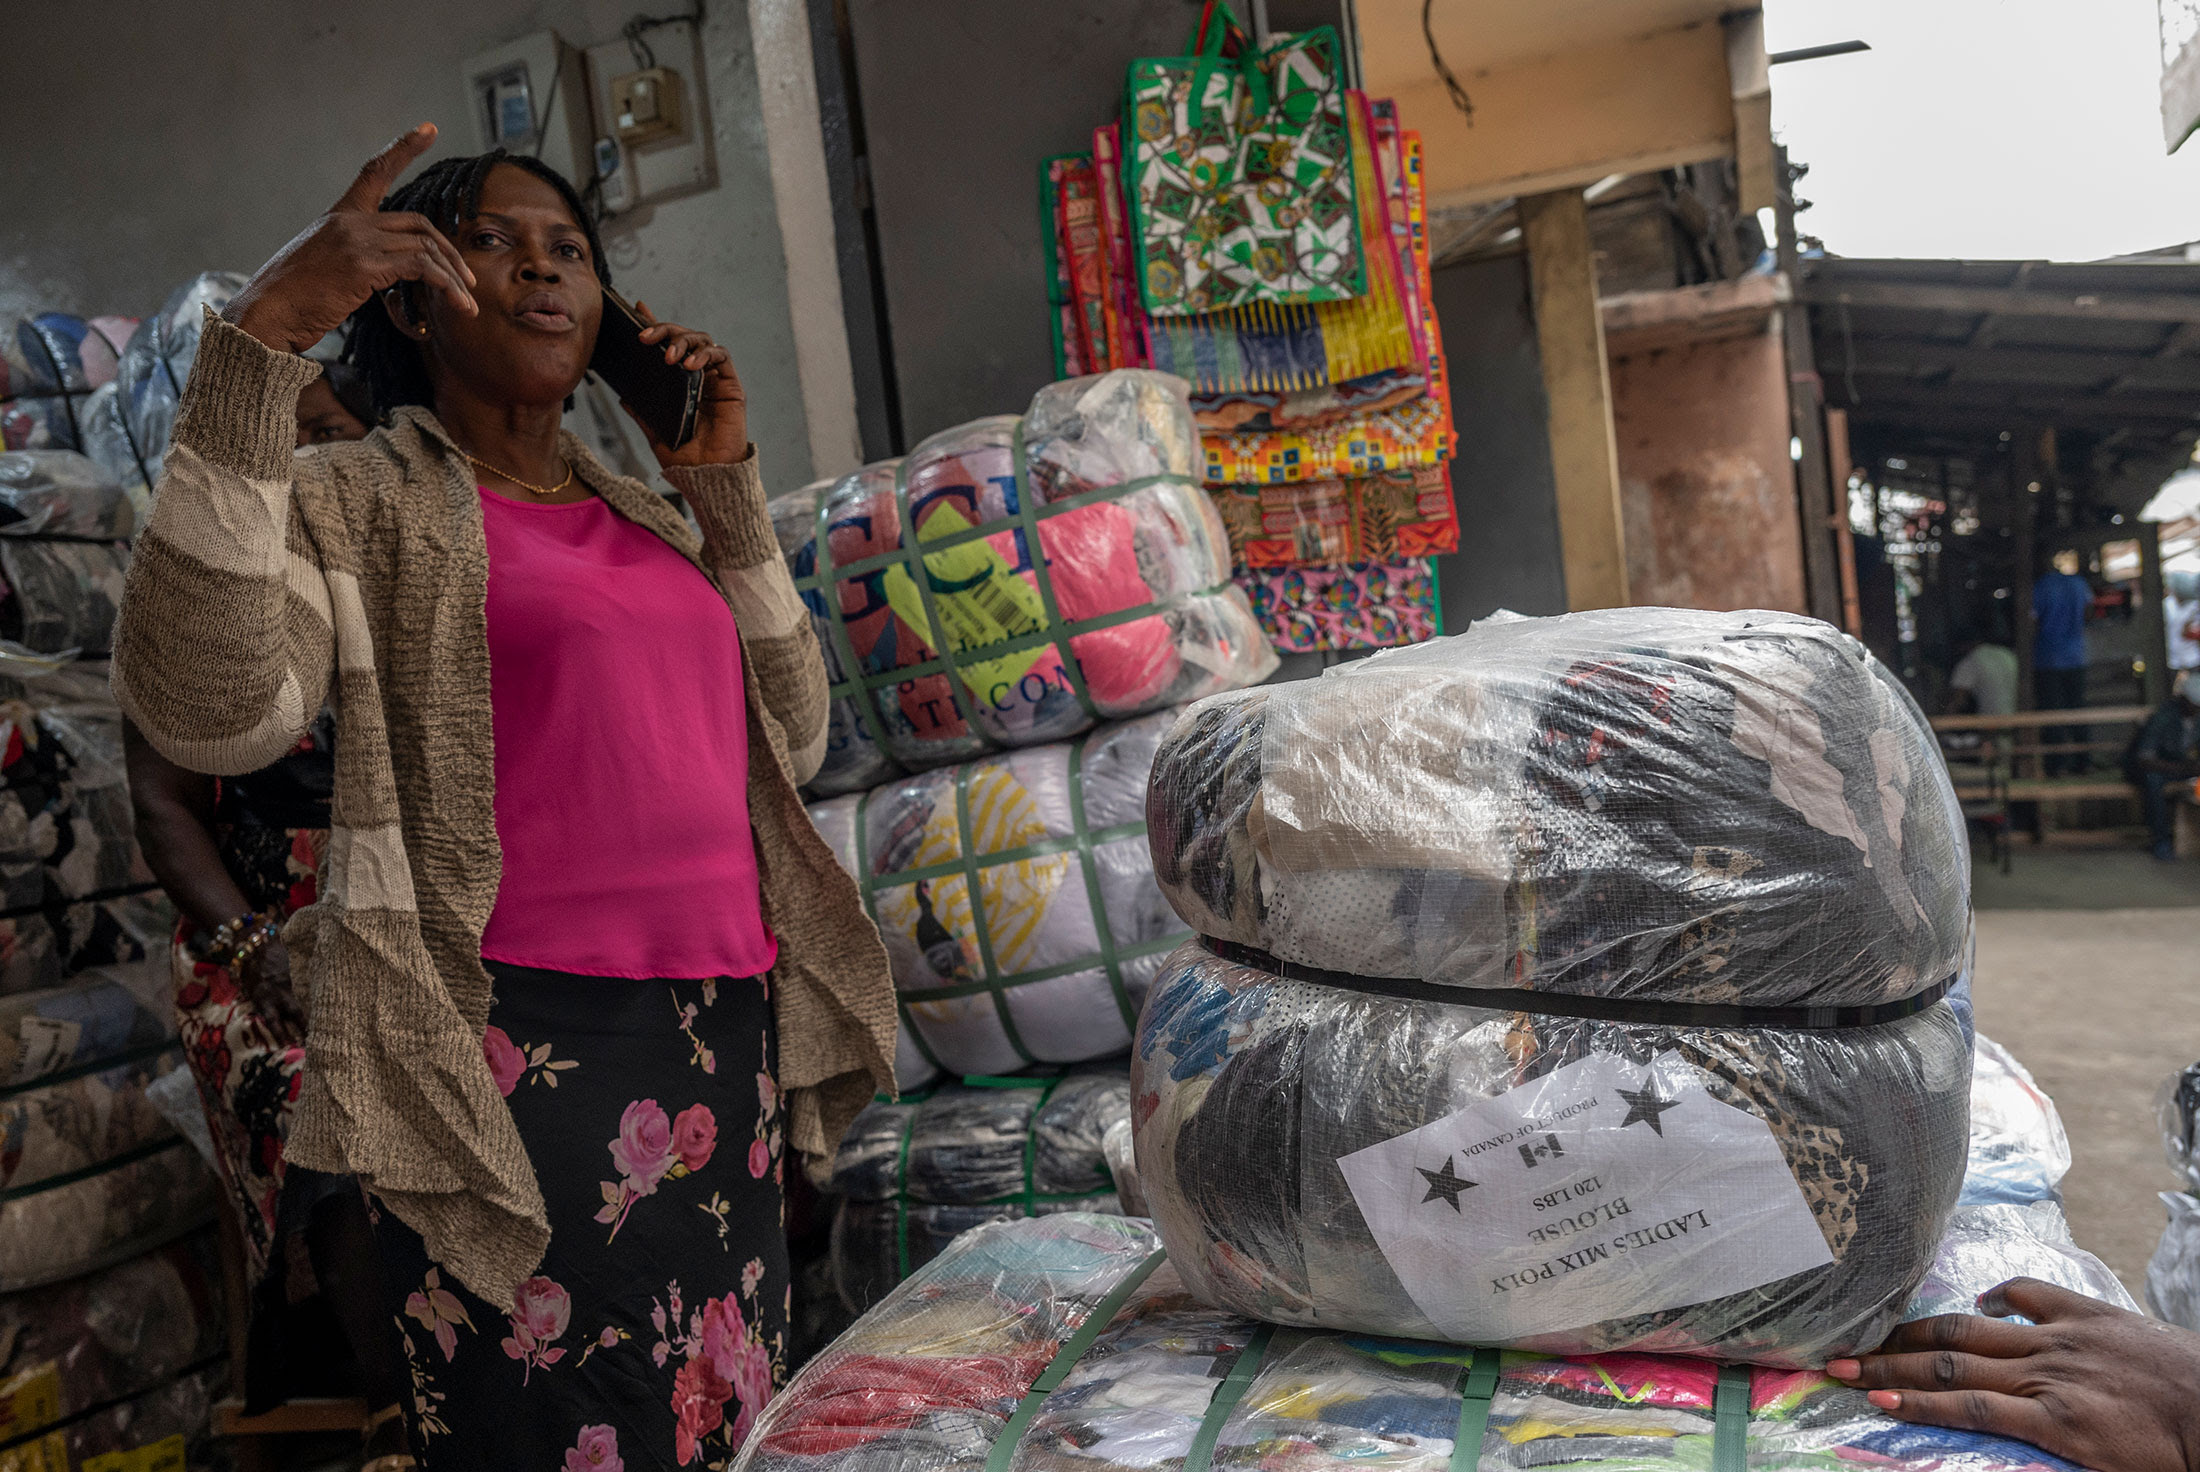 A seller speaks with a buyer as she tries to sell bales of secondhand clothing in Accra.